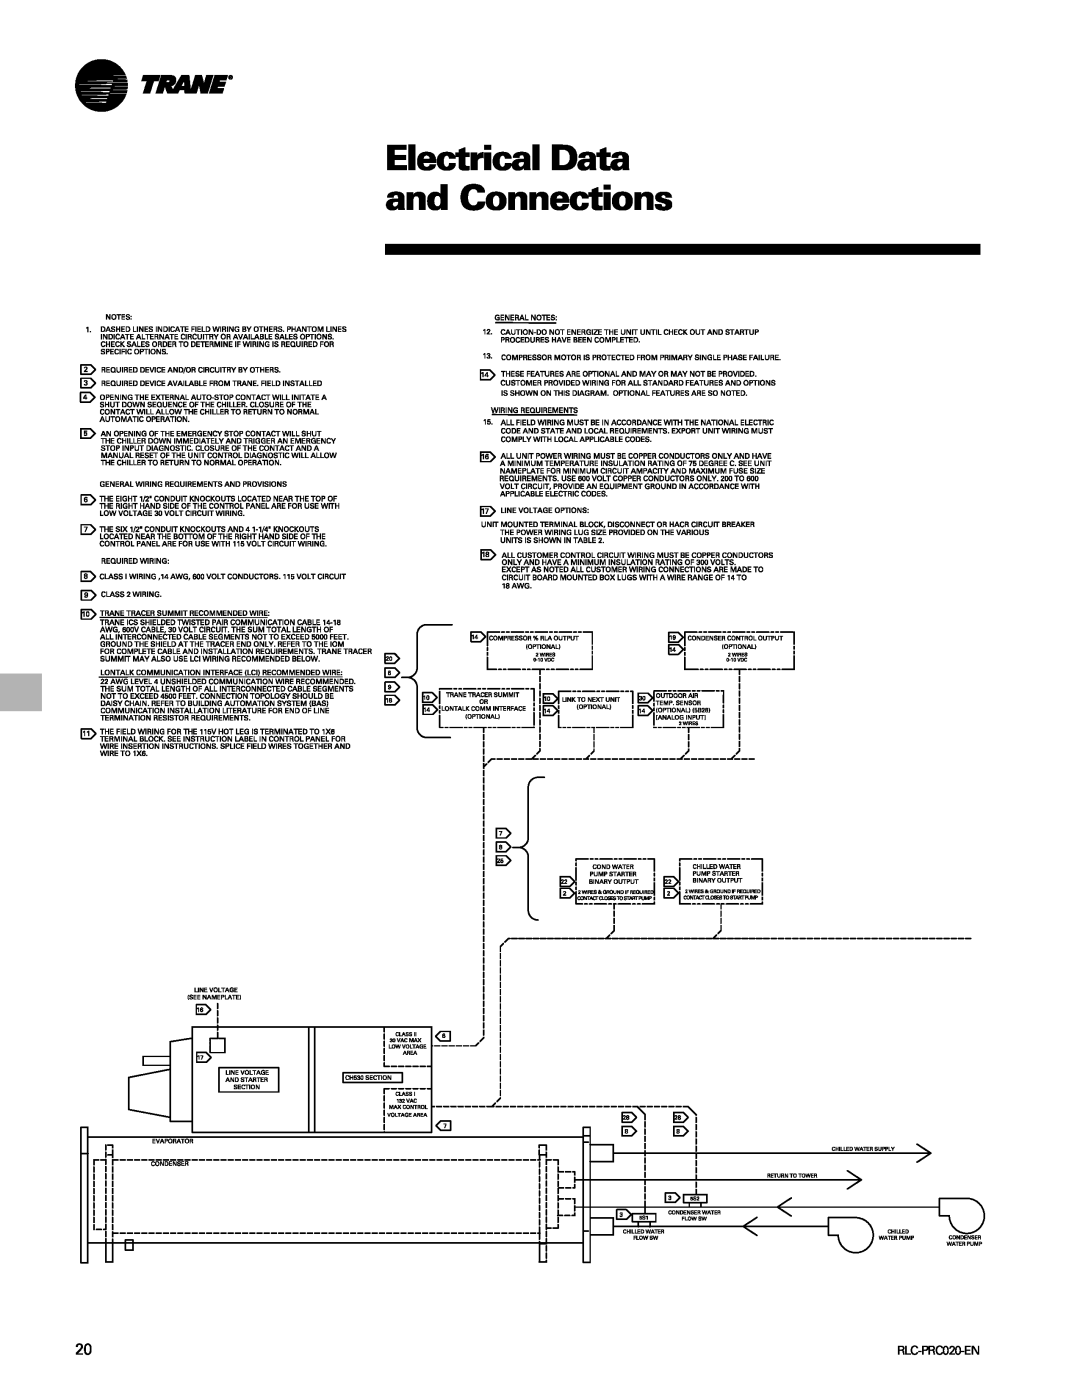 Trane RTHD manual Electrical Data and Connections, RLC-PRC020-EN 